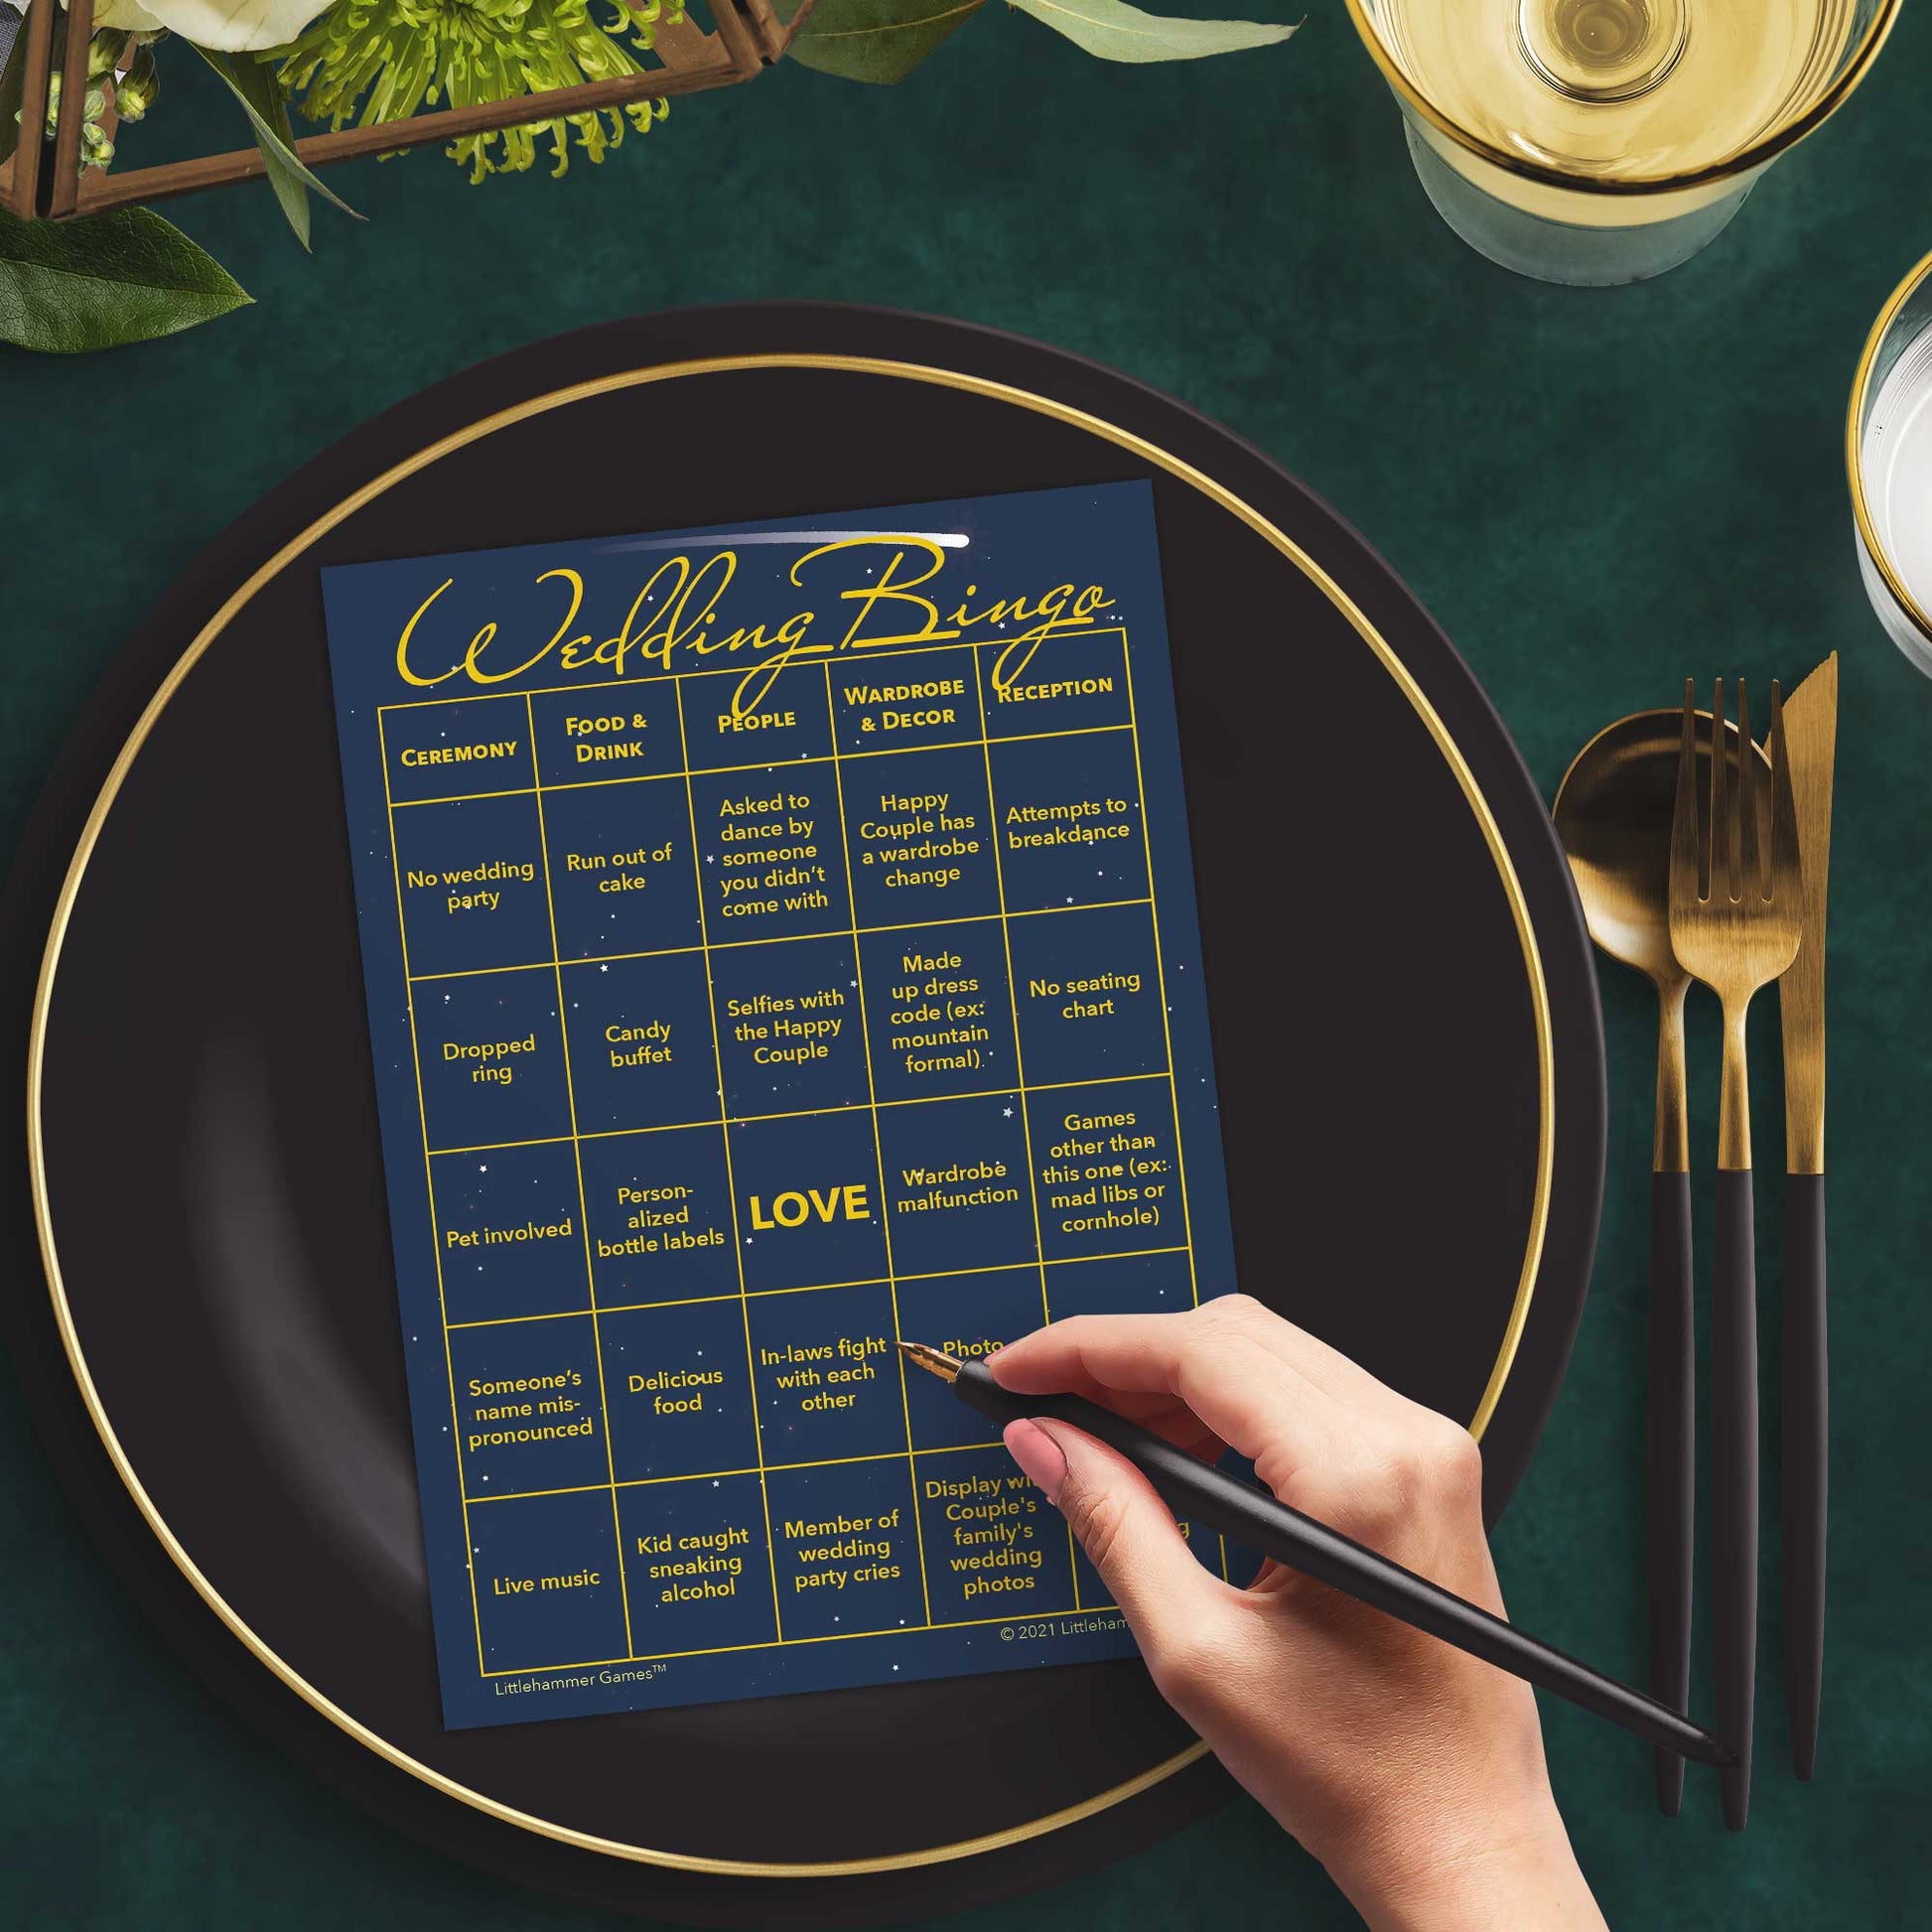 Woman with a pen sitting at a table with a celestial themed Wedding Bingo game card on a black and gold plate at a dark place setting